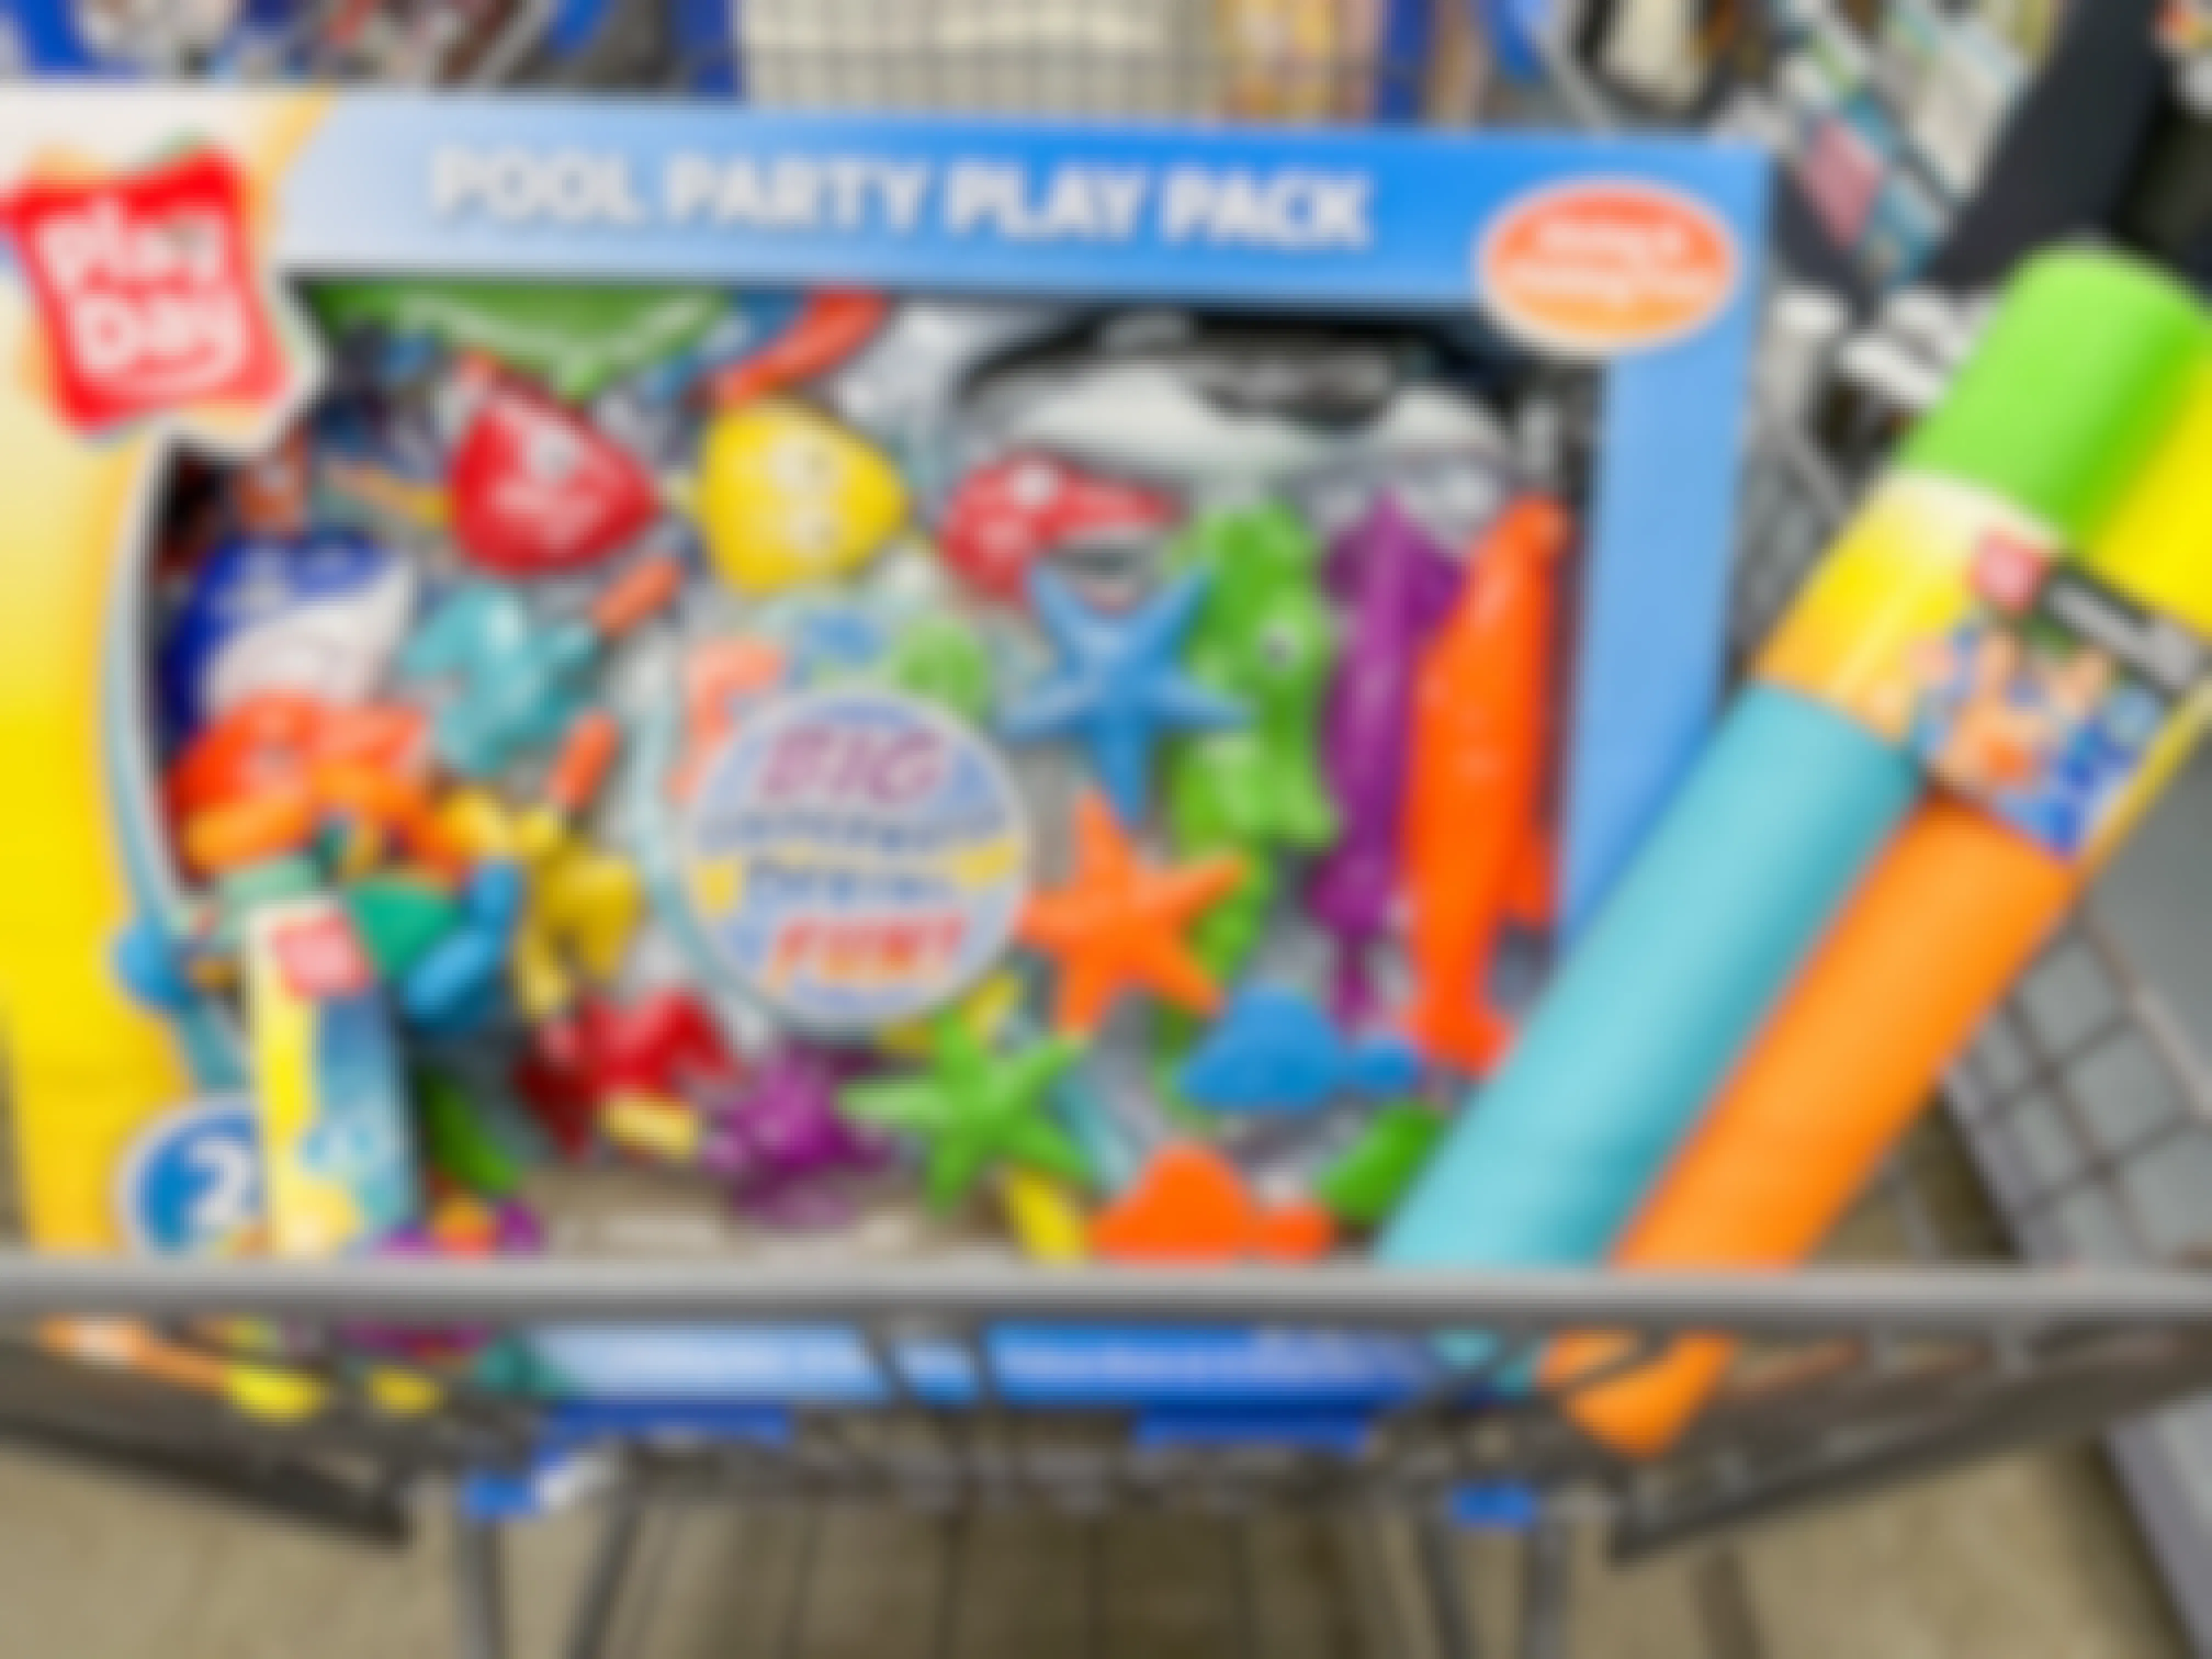 Walmart summer finds pool party play pack in a shopping cart